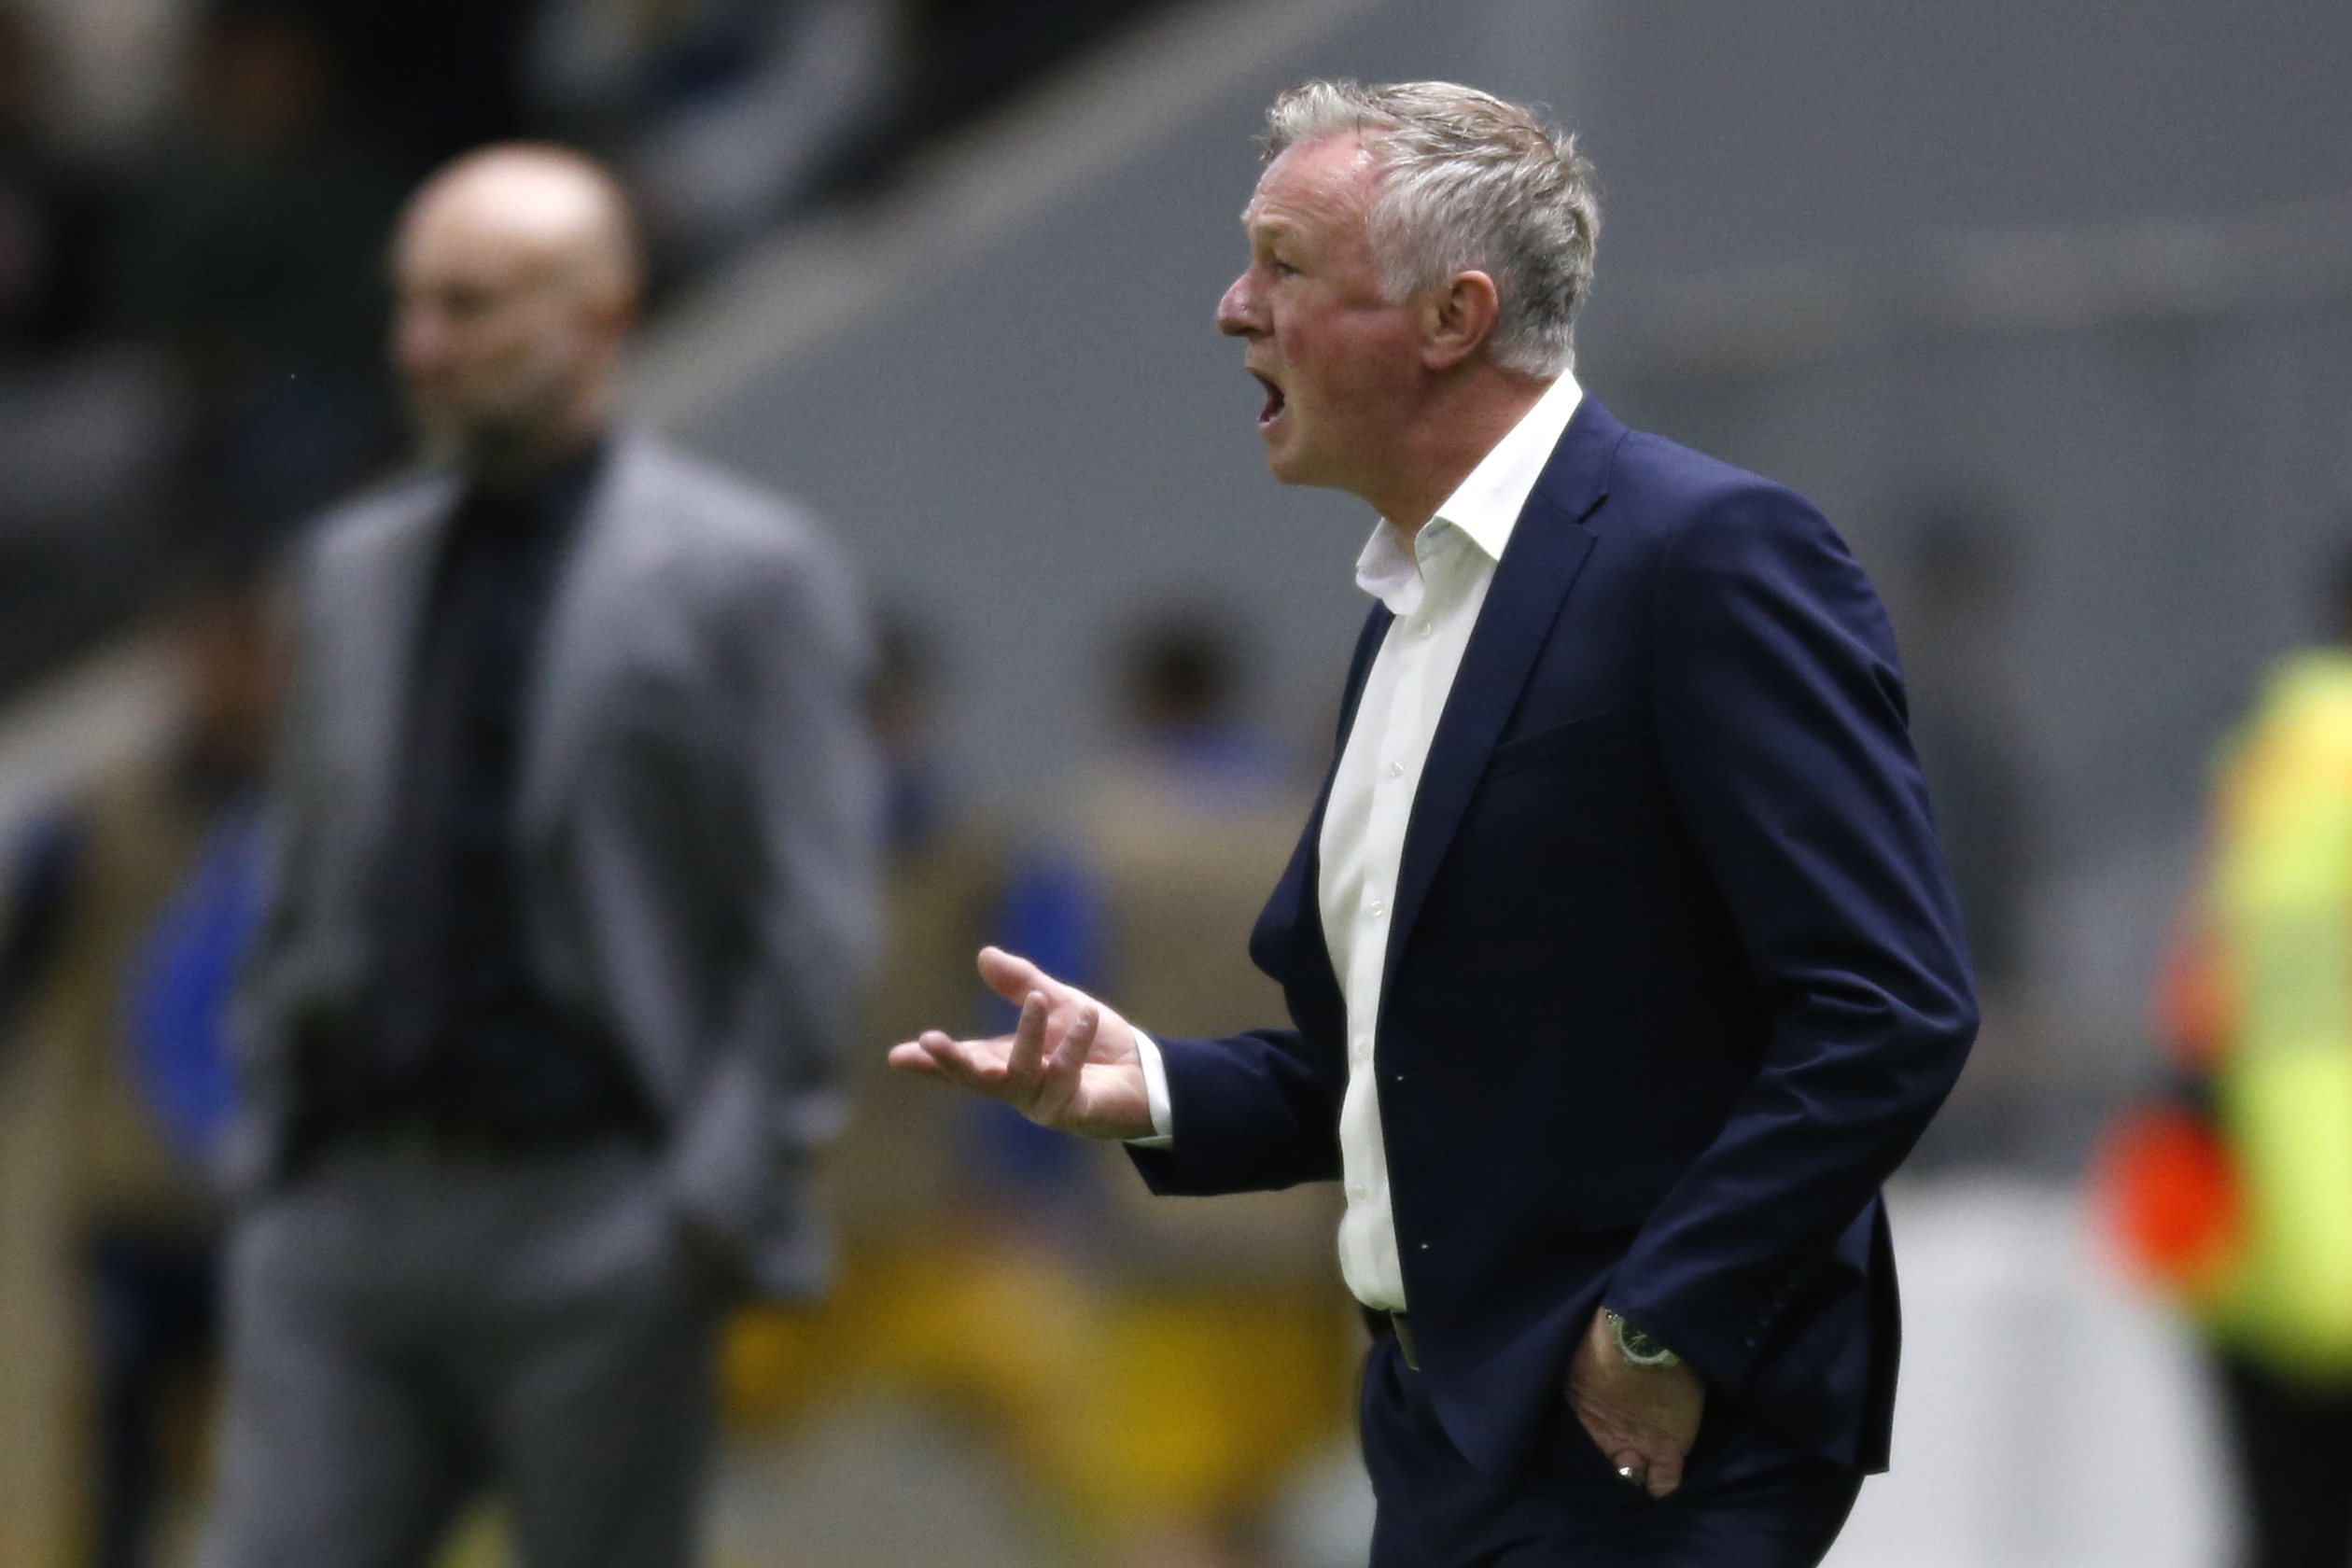 Michael O’Neill's side have failed to score in four of their last five matches